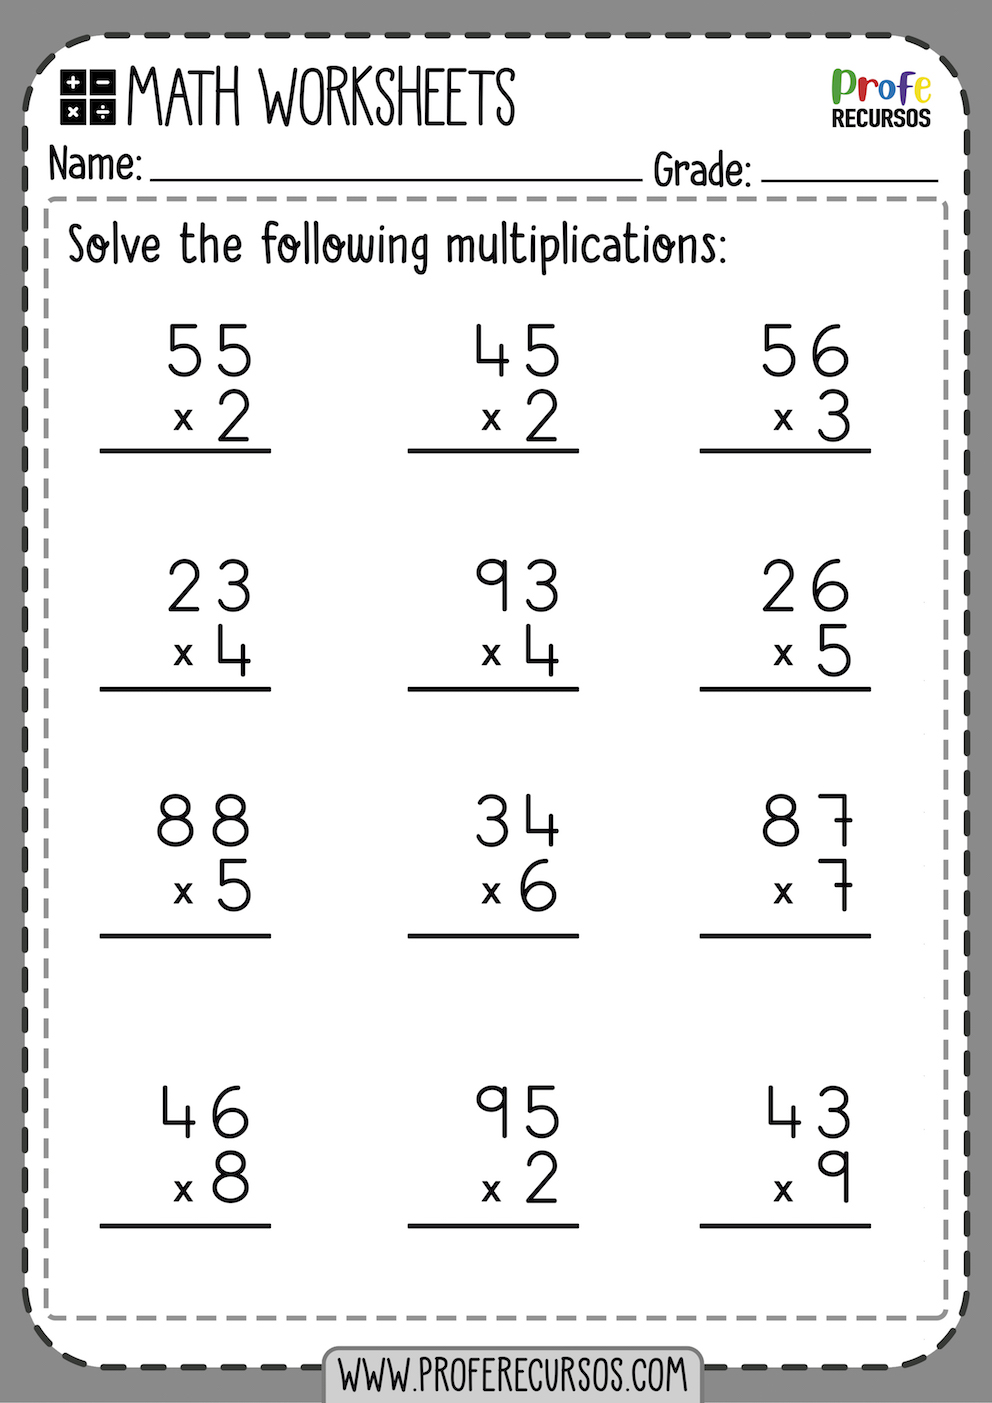 2 Times Table worksheets To Print 2 Times Table Worksheet 2 Times Multiply By 2 worksheets 